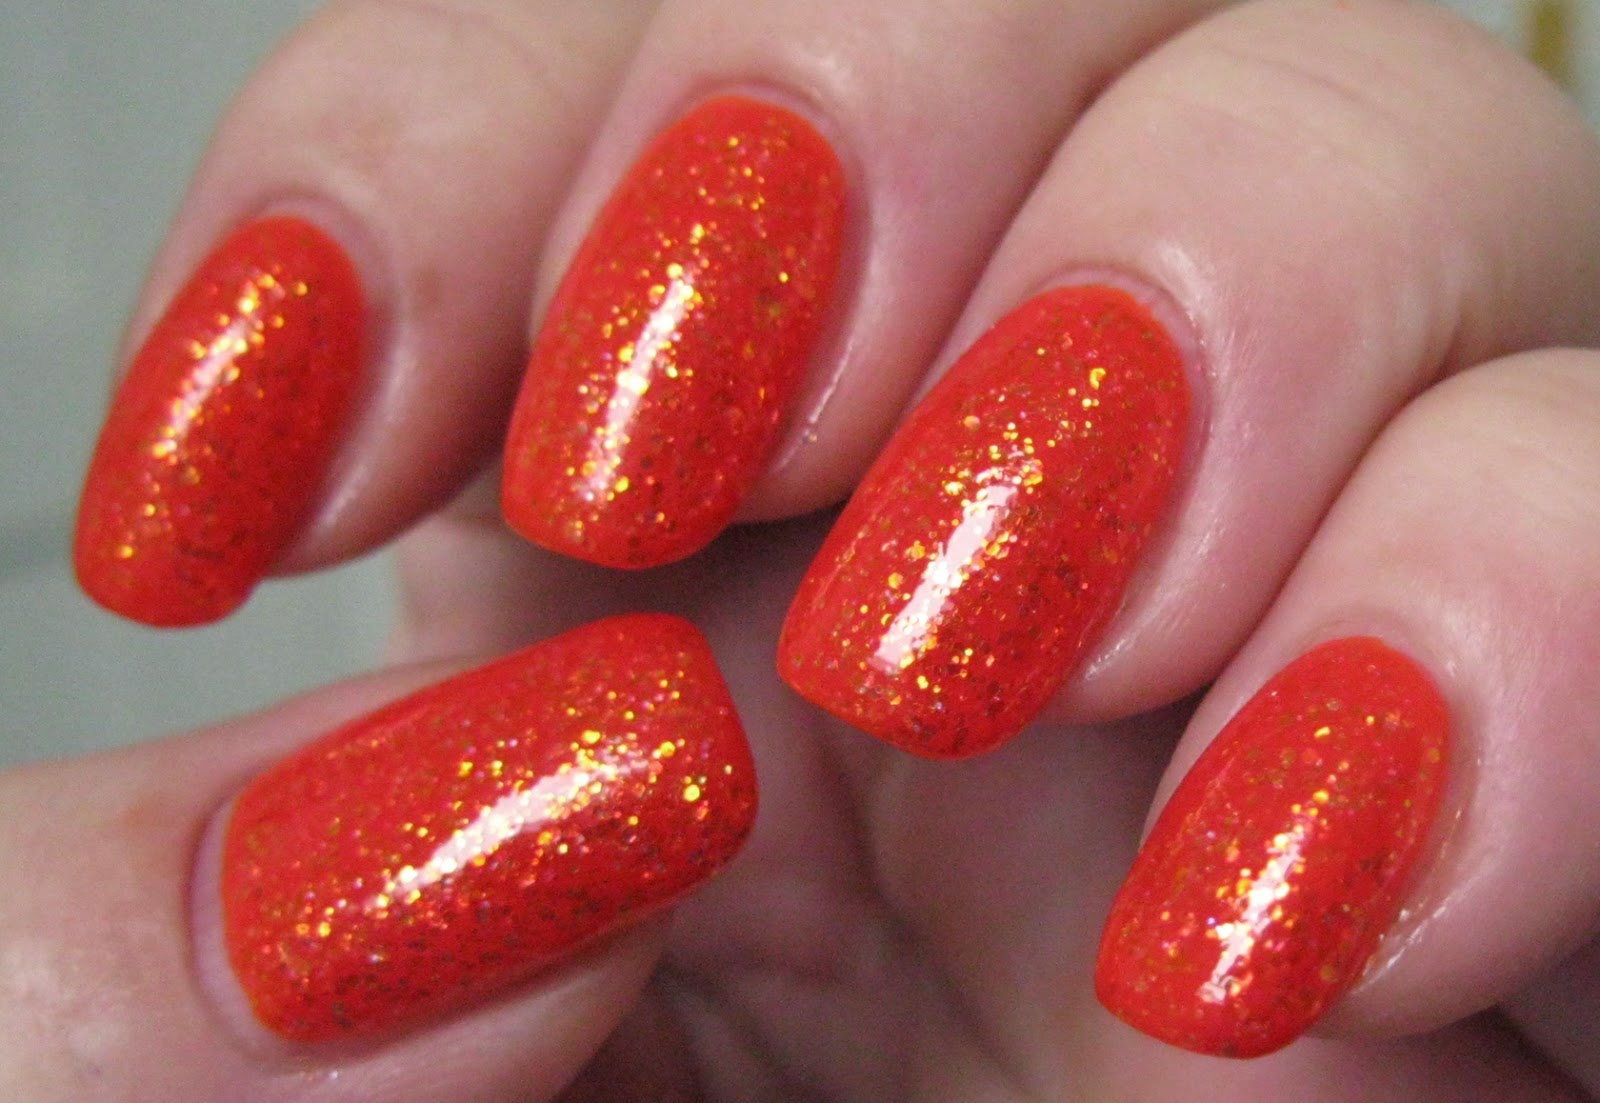 10. Orly Nail Lacquer in "Orange Punch" - wide 8